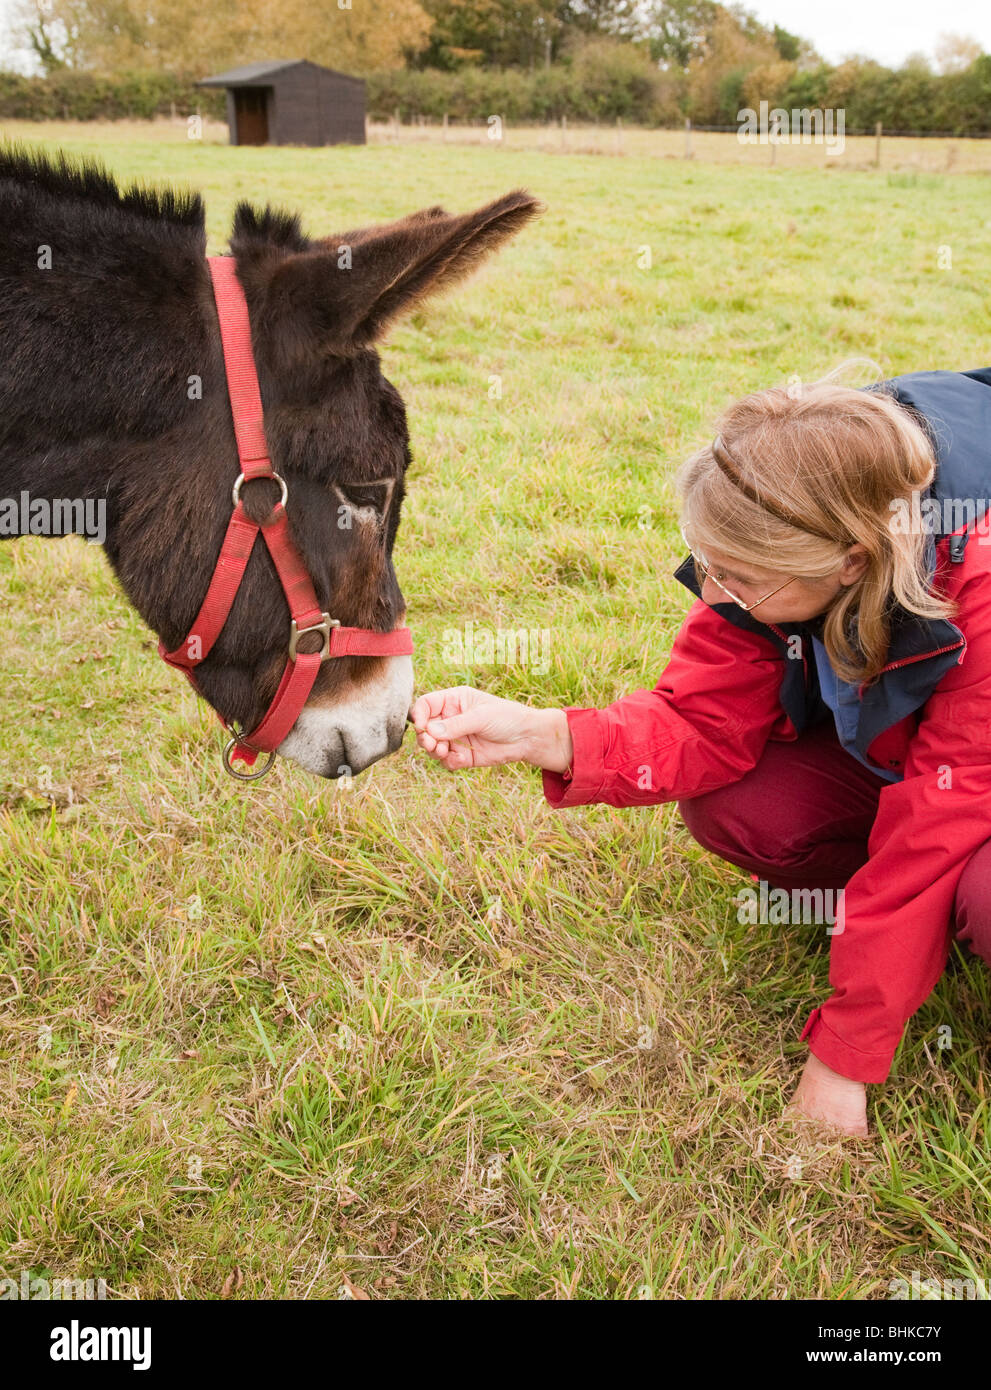 A brown donkey in a paddock making friends with a lady Stock Photo